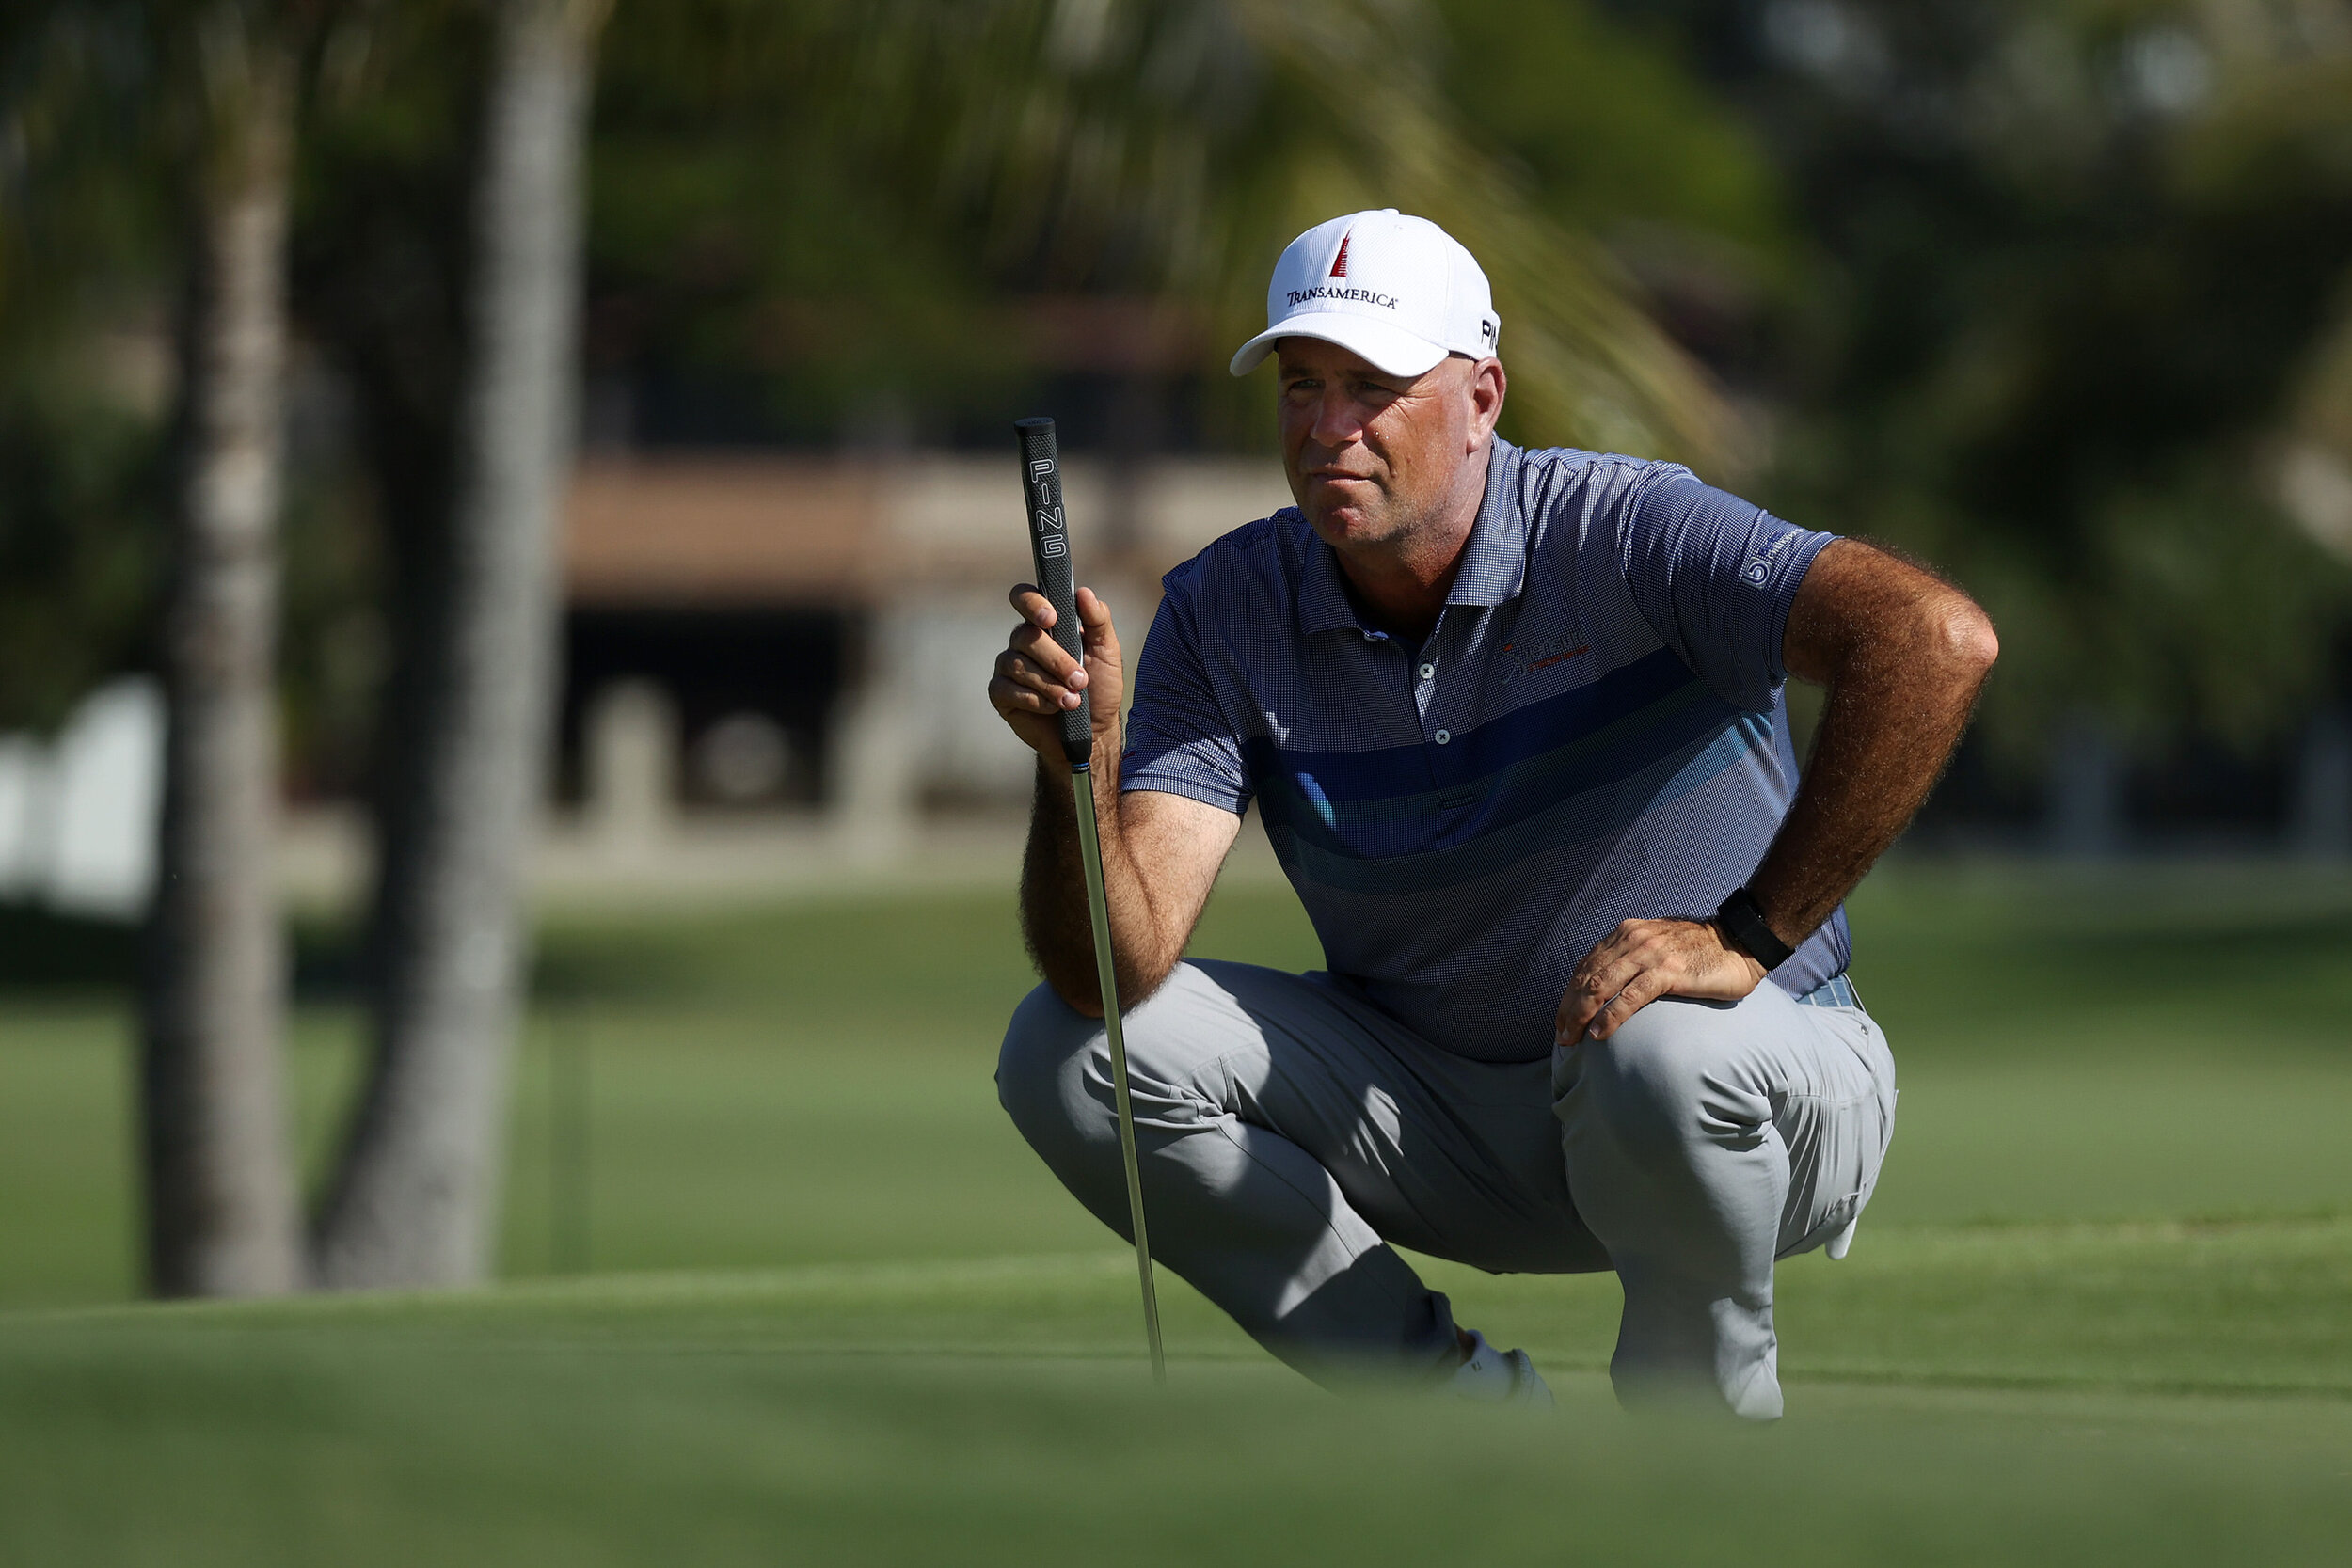  HONOLULU, HAWAII - JANUARY 15: Stewart Cink of the United States lines up his putt on the 13th green during the second round of the Sony Open in Hawaii at the Waialae Country Club on January 15, 2021 in Honolulu, Hawaii. (Photo by Gregory Shamus/Get